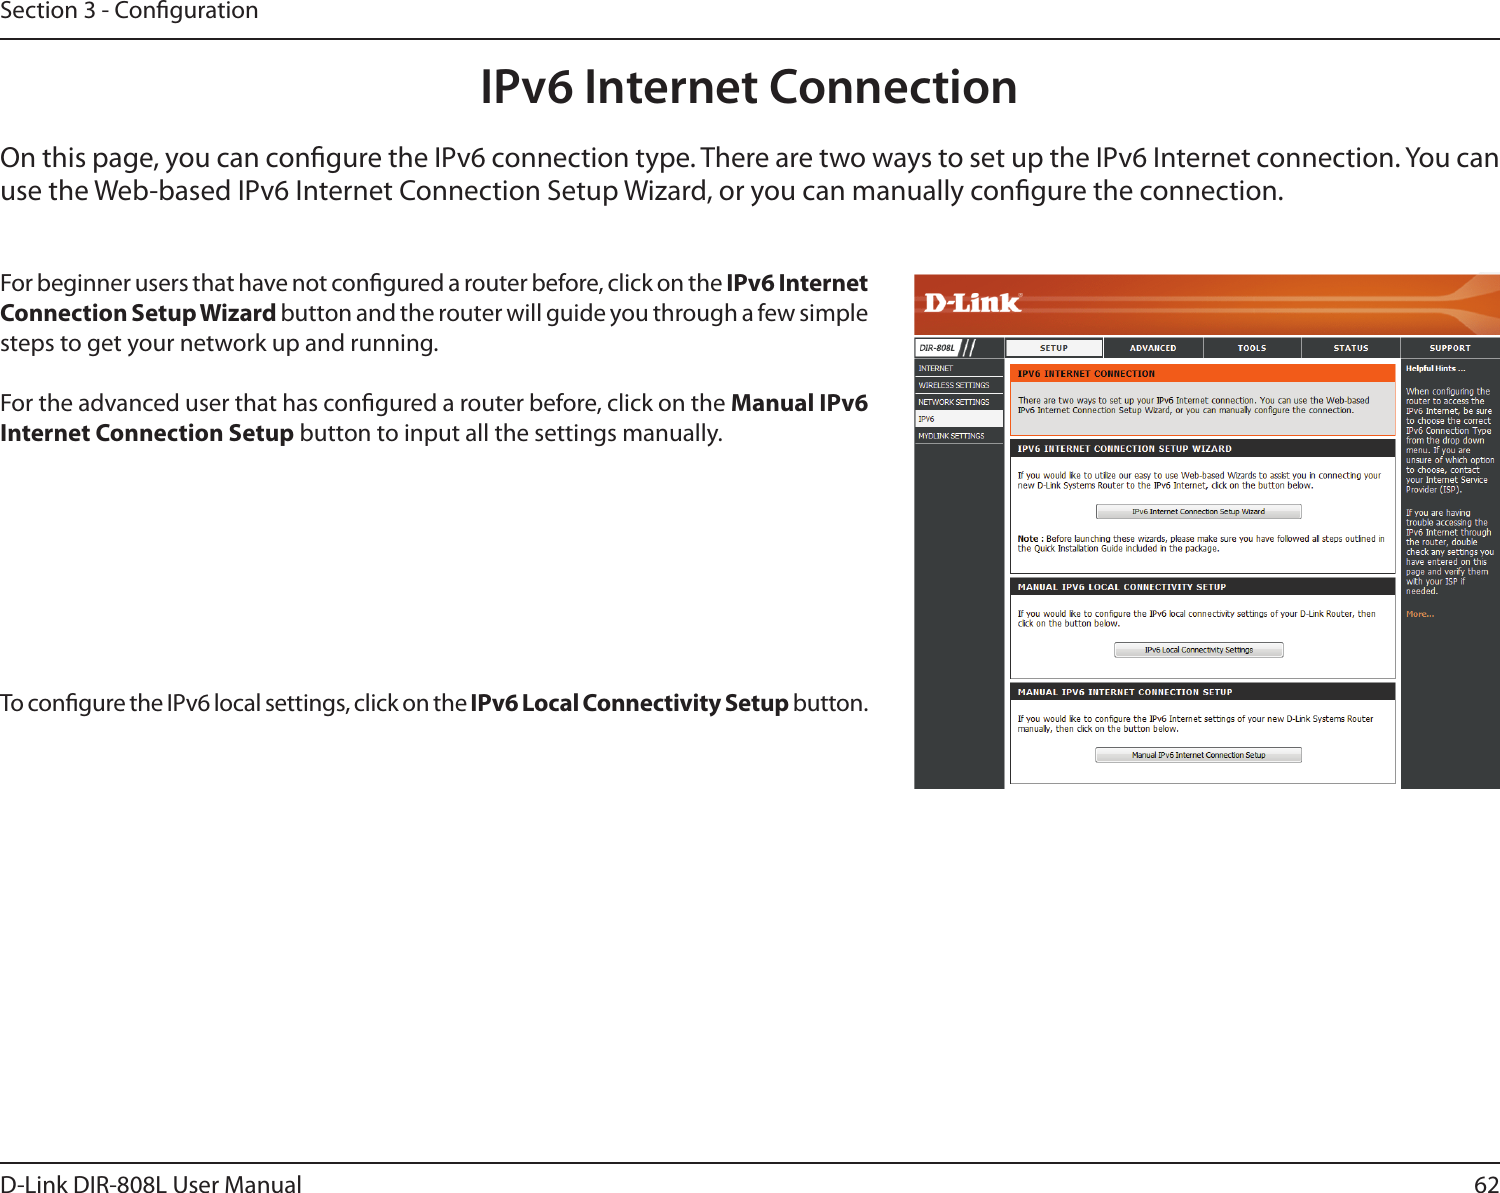 62D-Link DIR-808L User ManualSection 3 - CongurationIPv6 Internet ConnectionOn this page, you can congure the IPv6 connection type. There are two ways to set up the IPv6 Internet connection. You can use the Web-based IPv6 Internet Connection Setup Wizard, or you can manually congure the connection.For beginner users that have not congured a router before, click on the IPv6 Internet Connection Setup Wizard button and the router will guide you through a few simple steps to get your network up and running.For the advanced user that has congured a router before, click on the Manual IPv6 Internet Connection Setup button to input all the settings manually.To congure the IPv6 local settings, click on the IPv6 Local Connectivity Setup button.